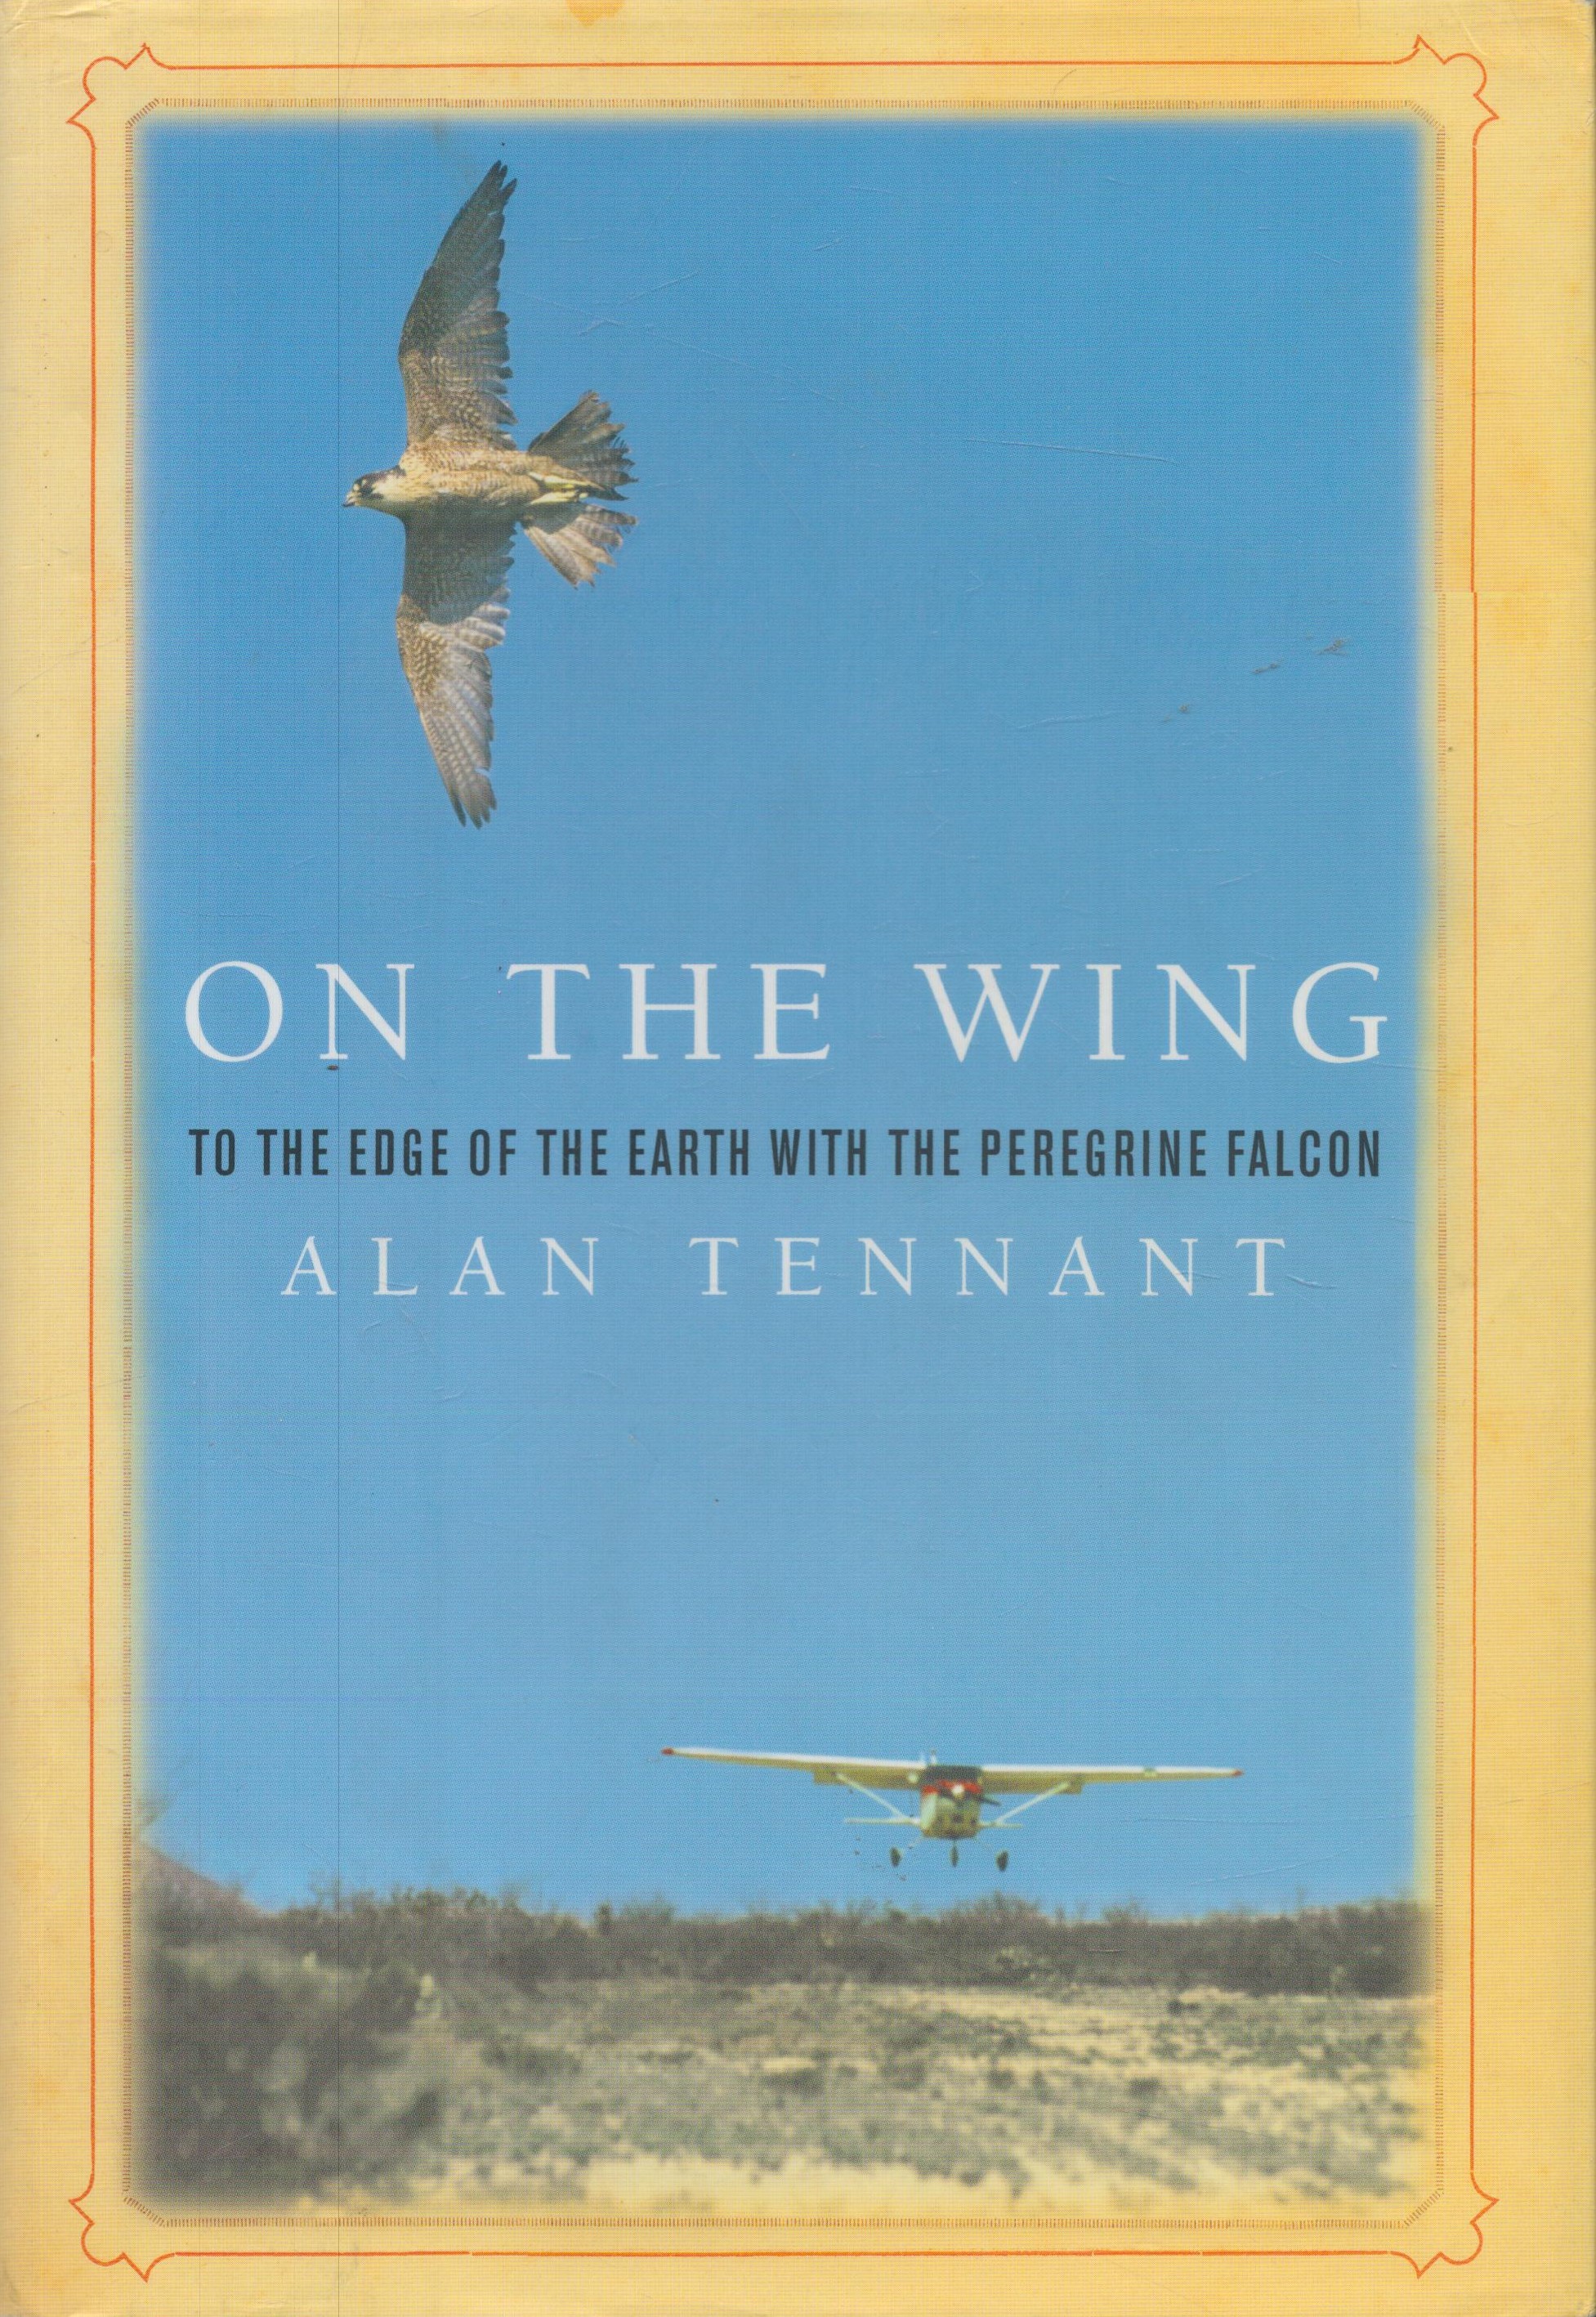 Alan Tennant Signed Book On The Wing To the Edge of the Earth with the Perigrine Falcon by Alan - Image 2 of 9